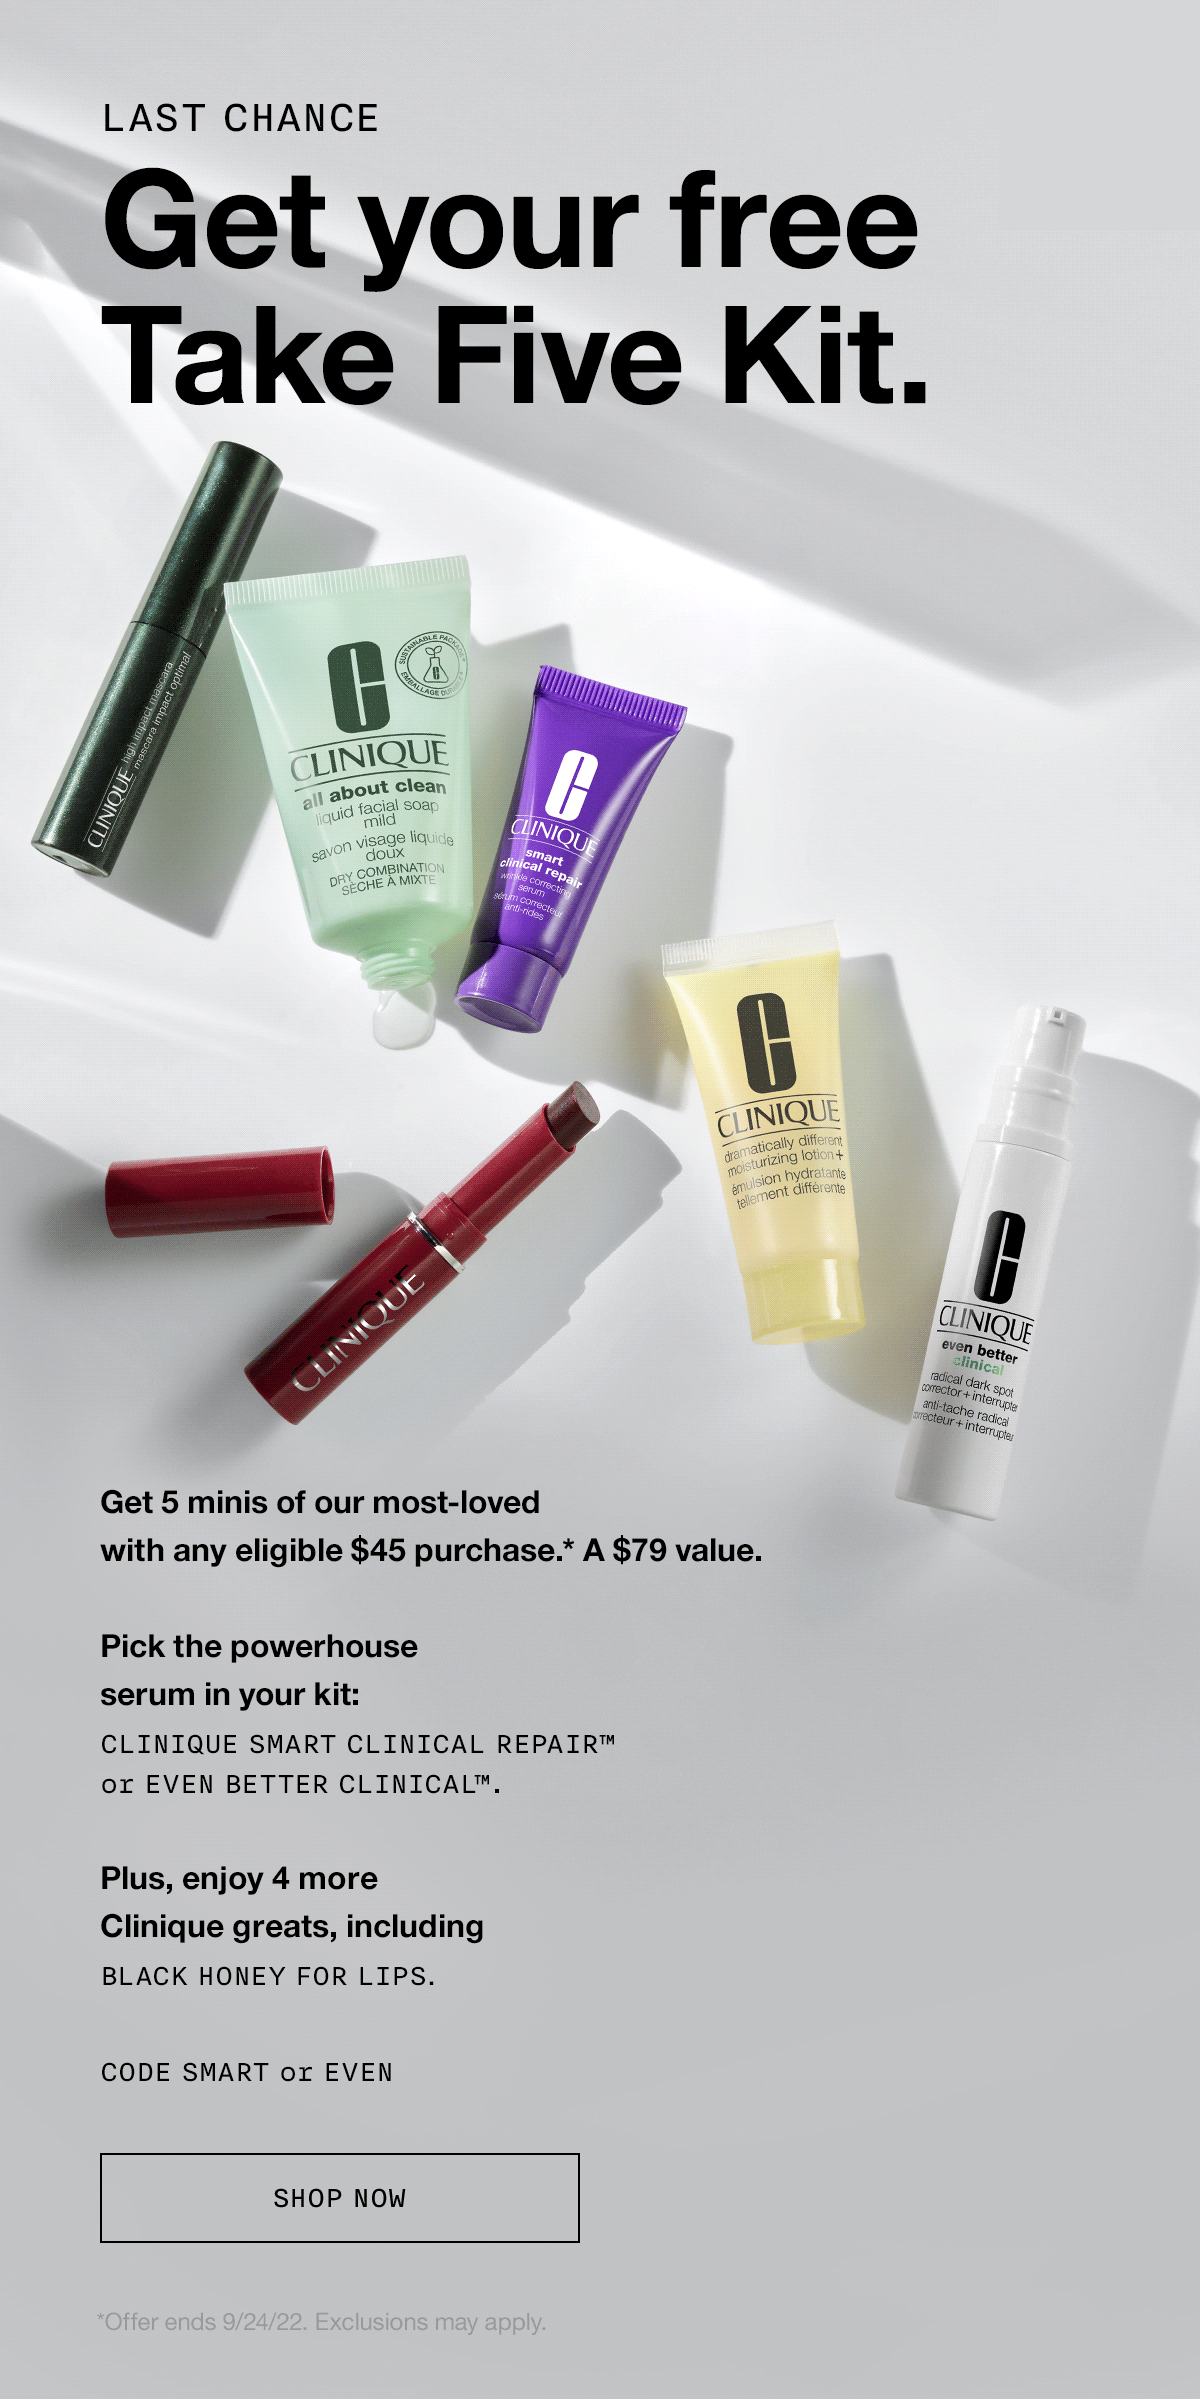 LAST CHANCE | Get your free Take Five Kit. Get 5 minis of our most-loved with any eligible $45 purchase.* A $79 value. | Pick the powerhouse serum in your kit: Clinique Smart Clinical Repair™ or Even Better Clinical™. Plus, enjoy 4 more Clinique greats, including Black Honey for lips. CODE SMART or EVEN | *Offer ends 9/24/22. Exclusions may apply.